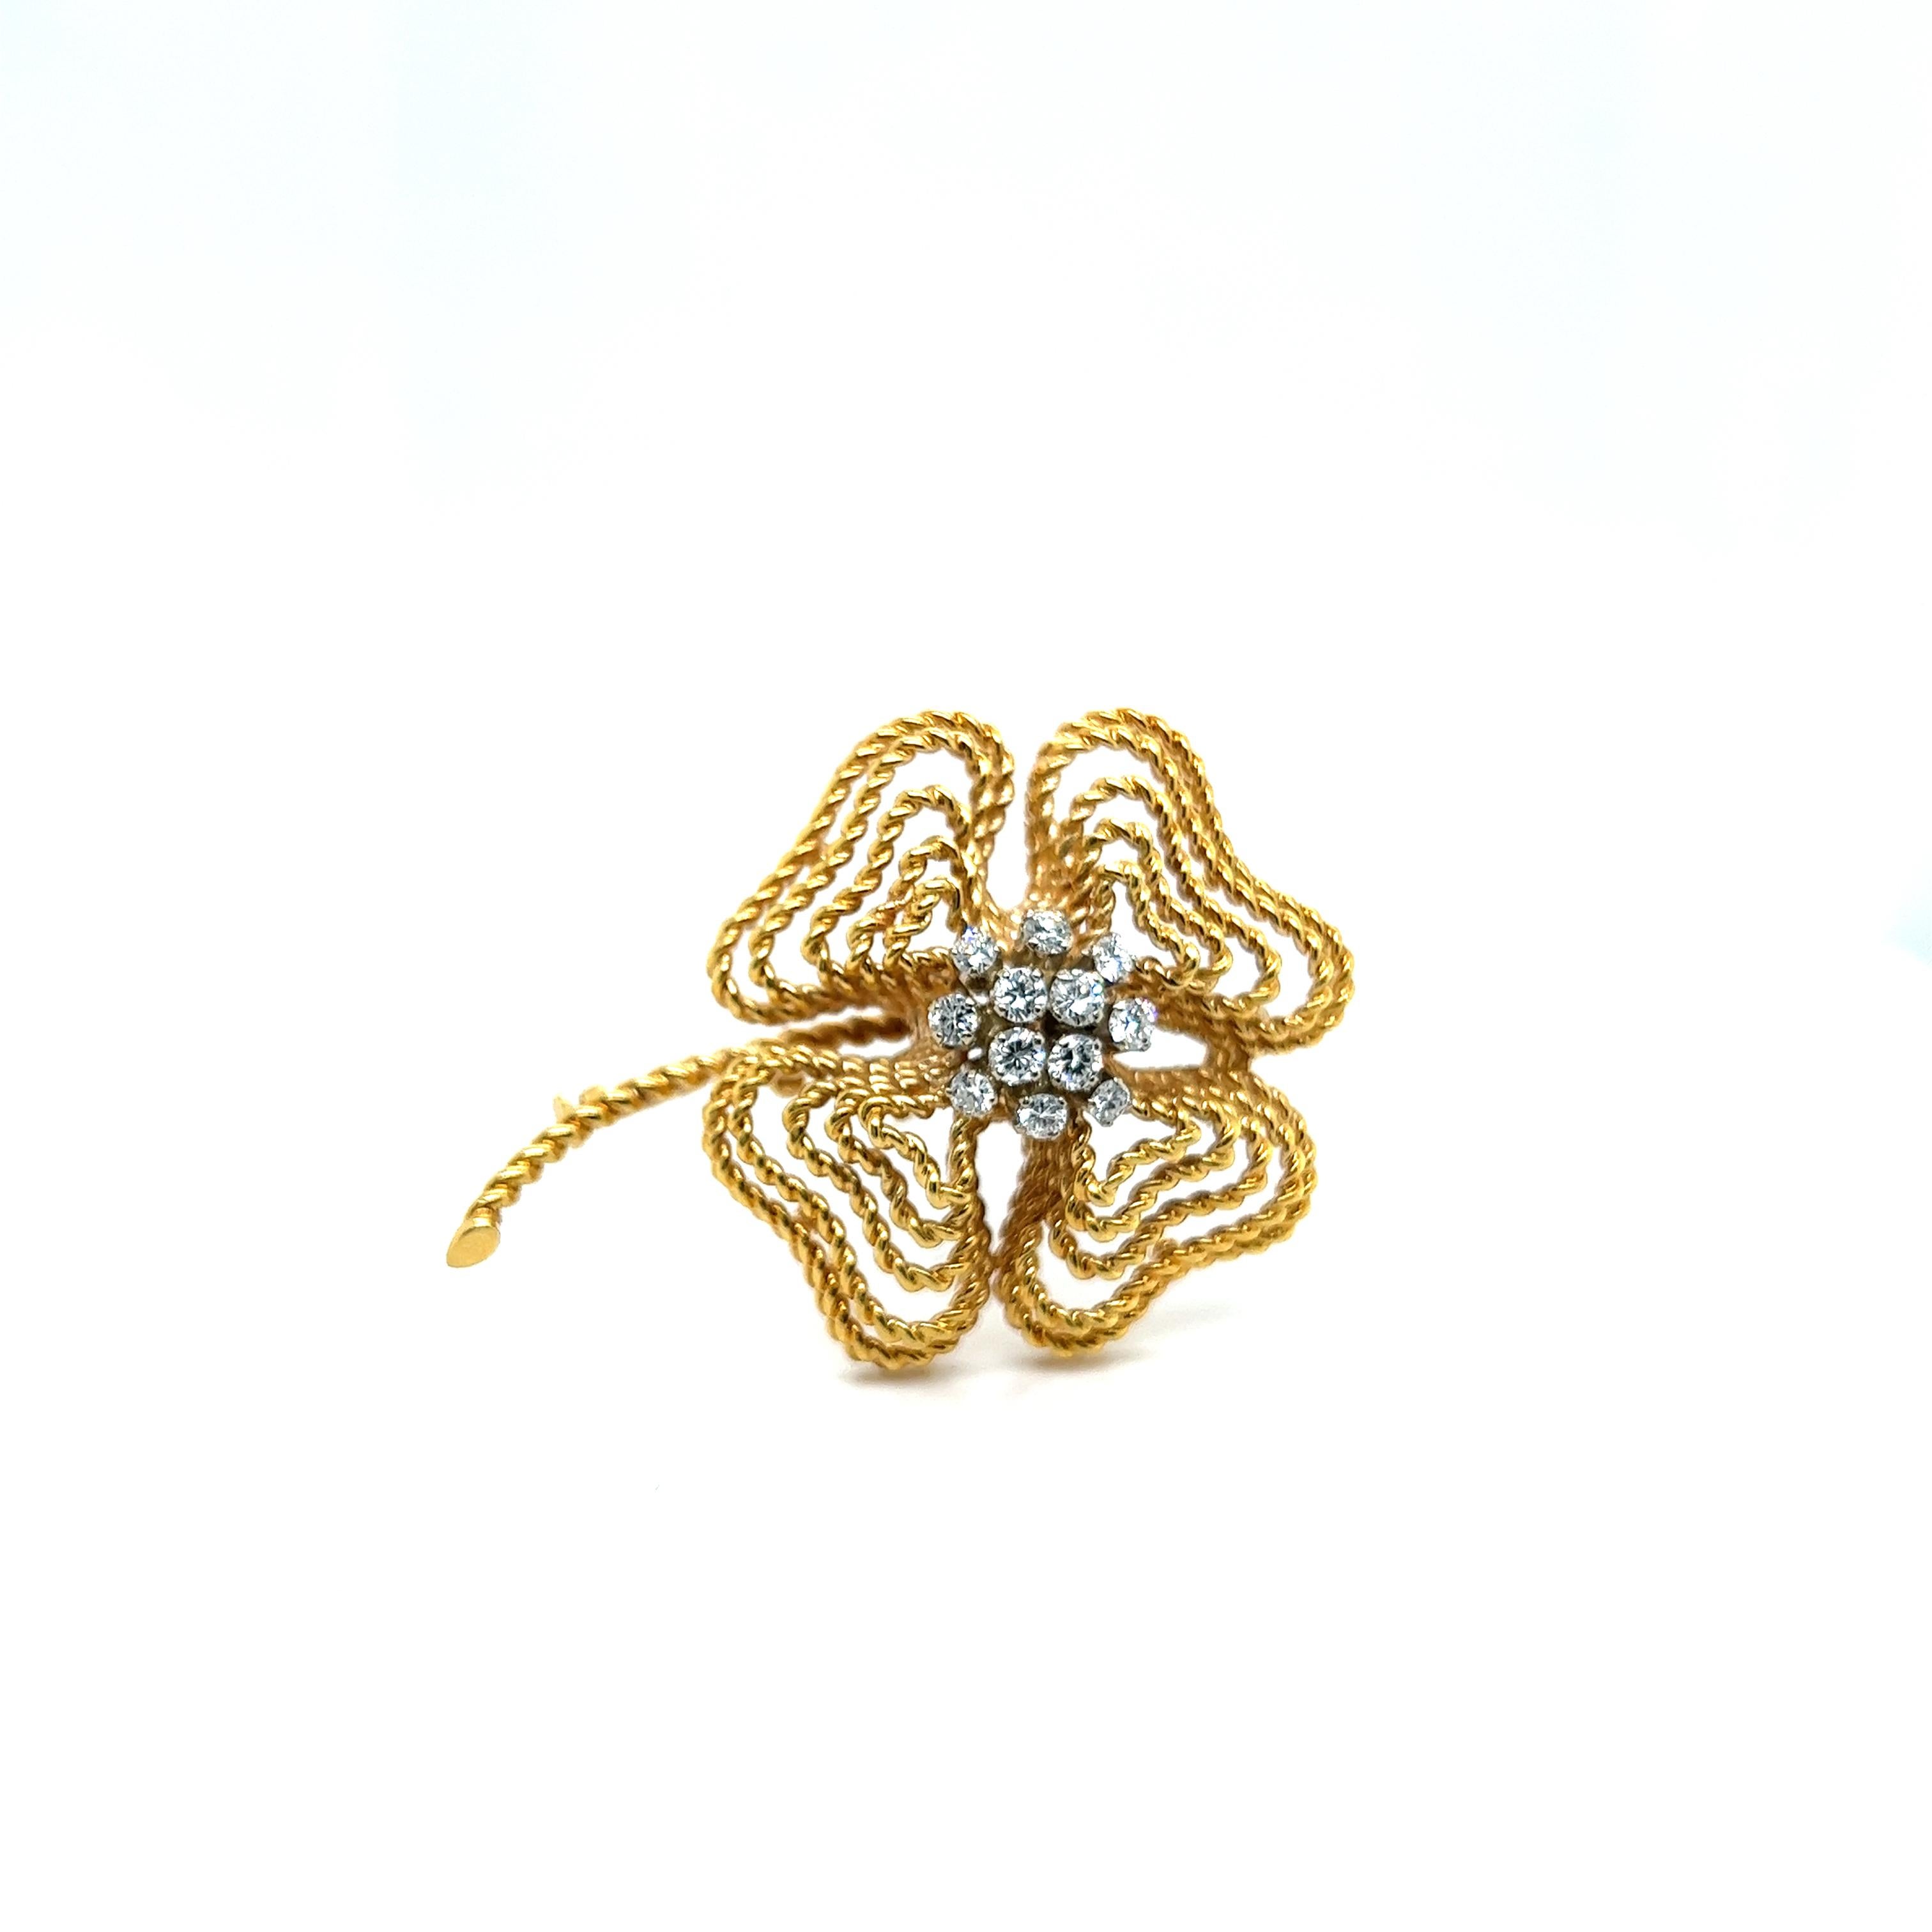 Clover Brooch with Diamonds in 18 Karat Yellow and White Gold For Sale 7